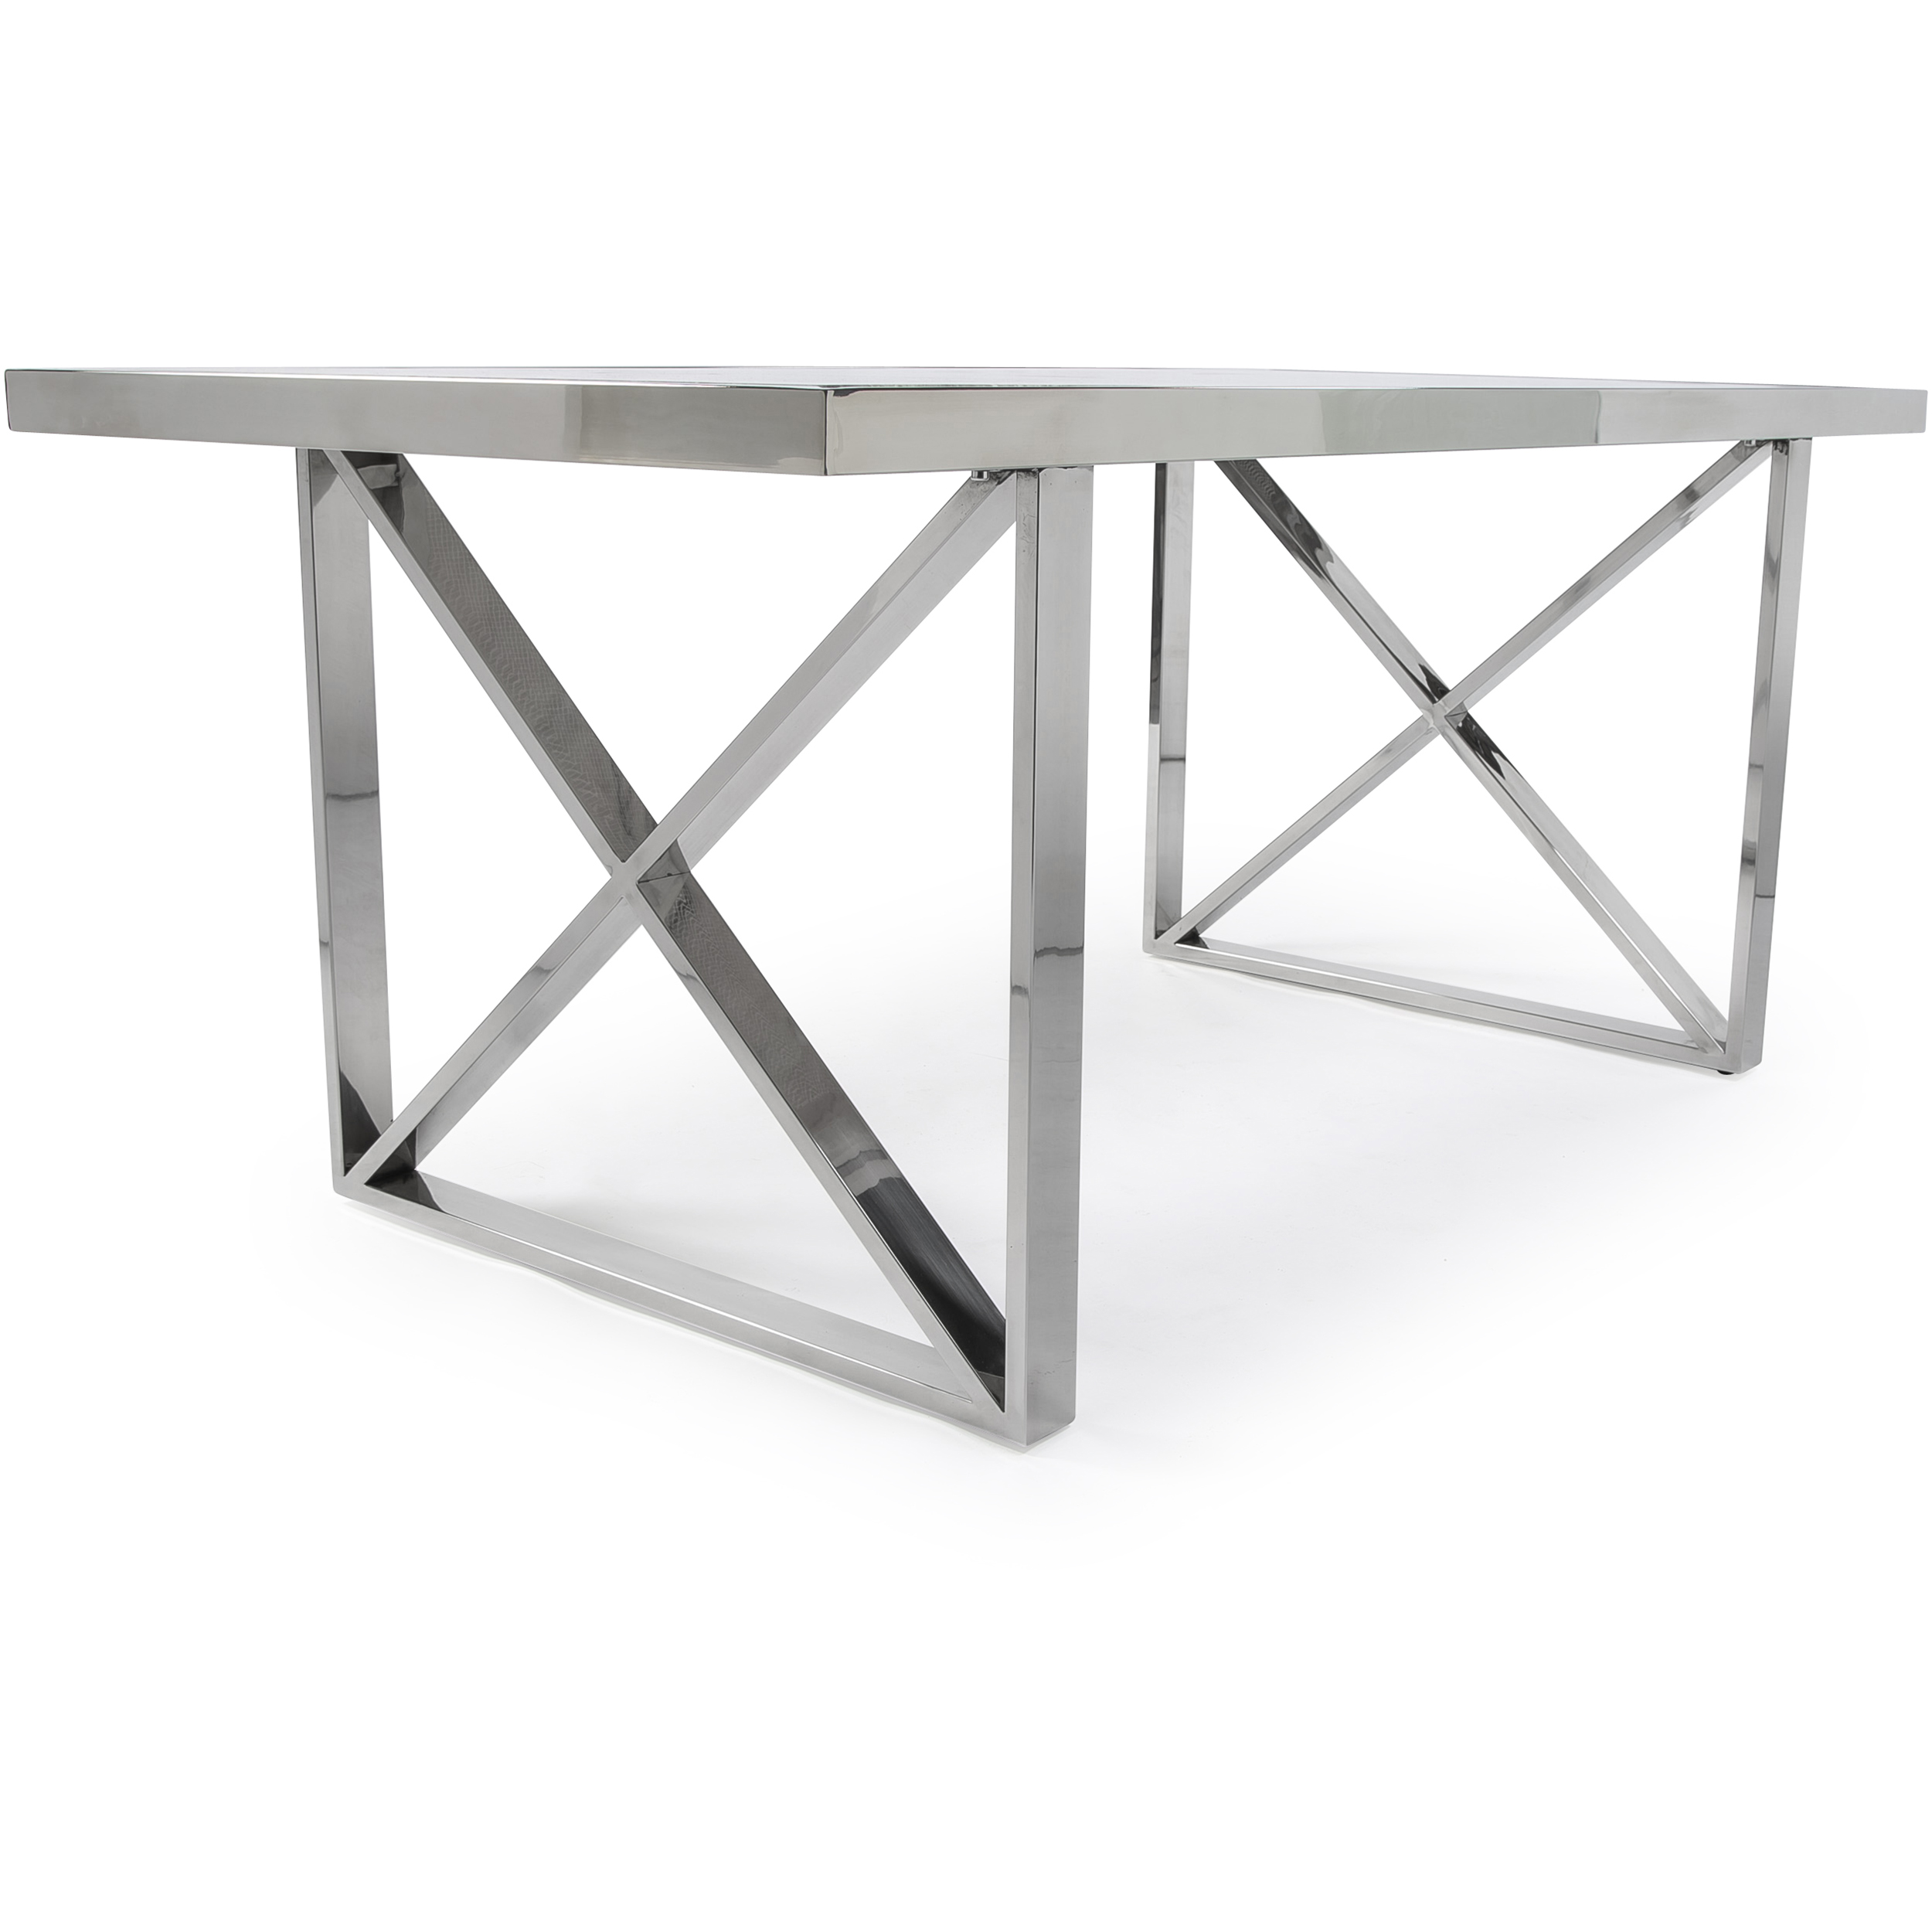 1.8M Tuscany Grey Marble Dining Room Table with Crossed Polished Steel Base